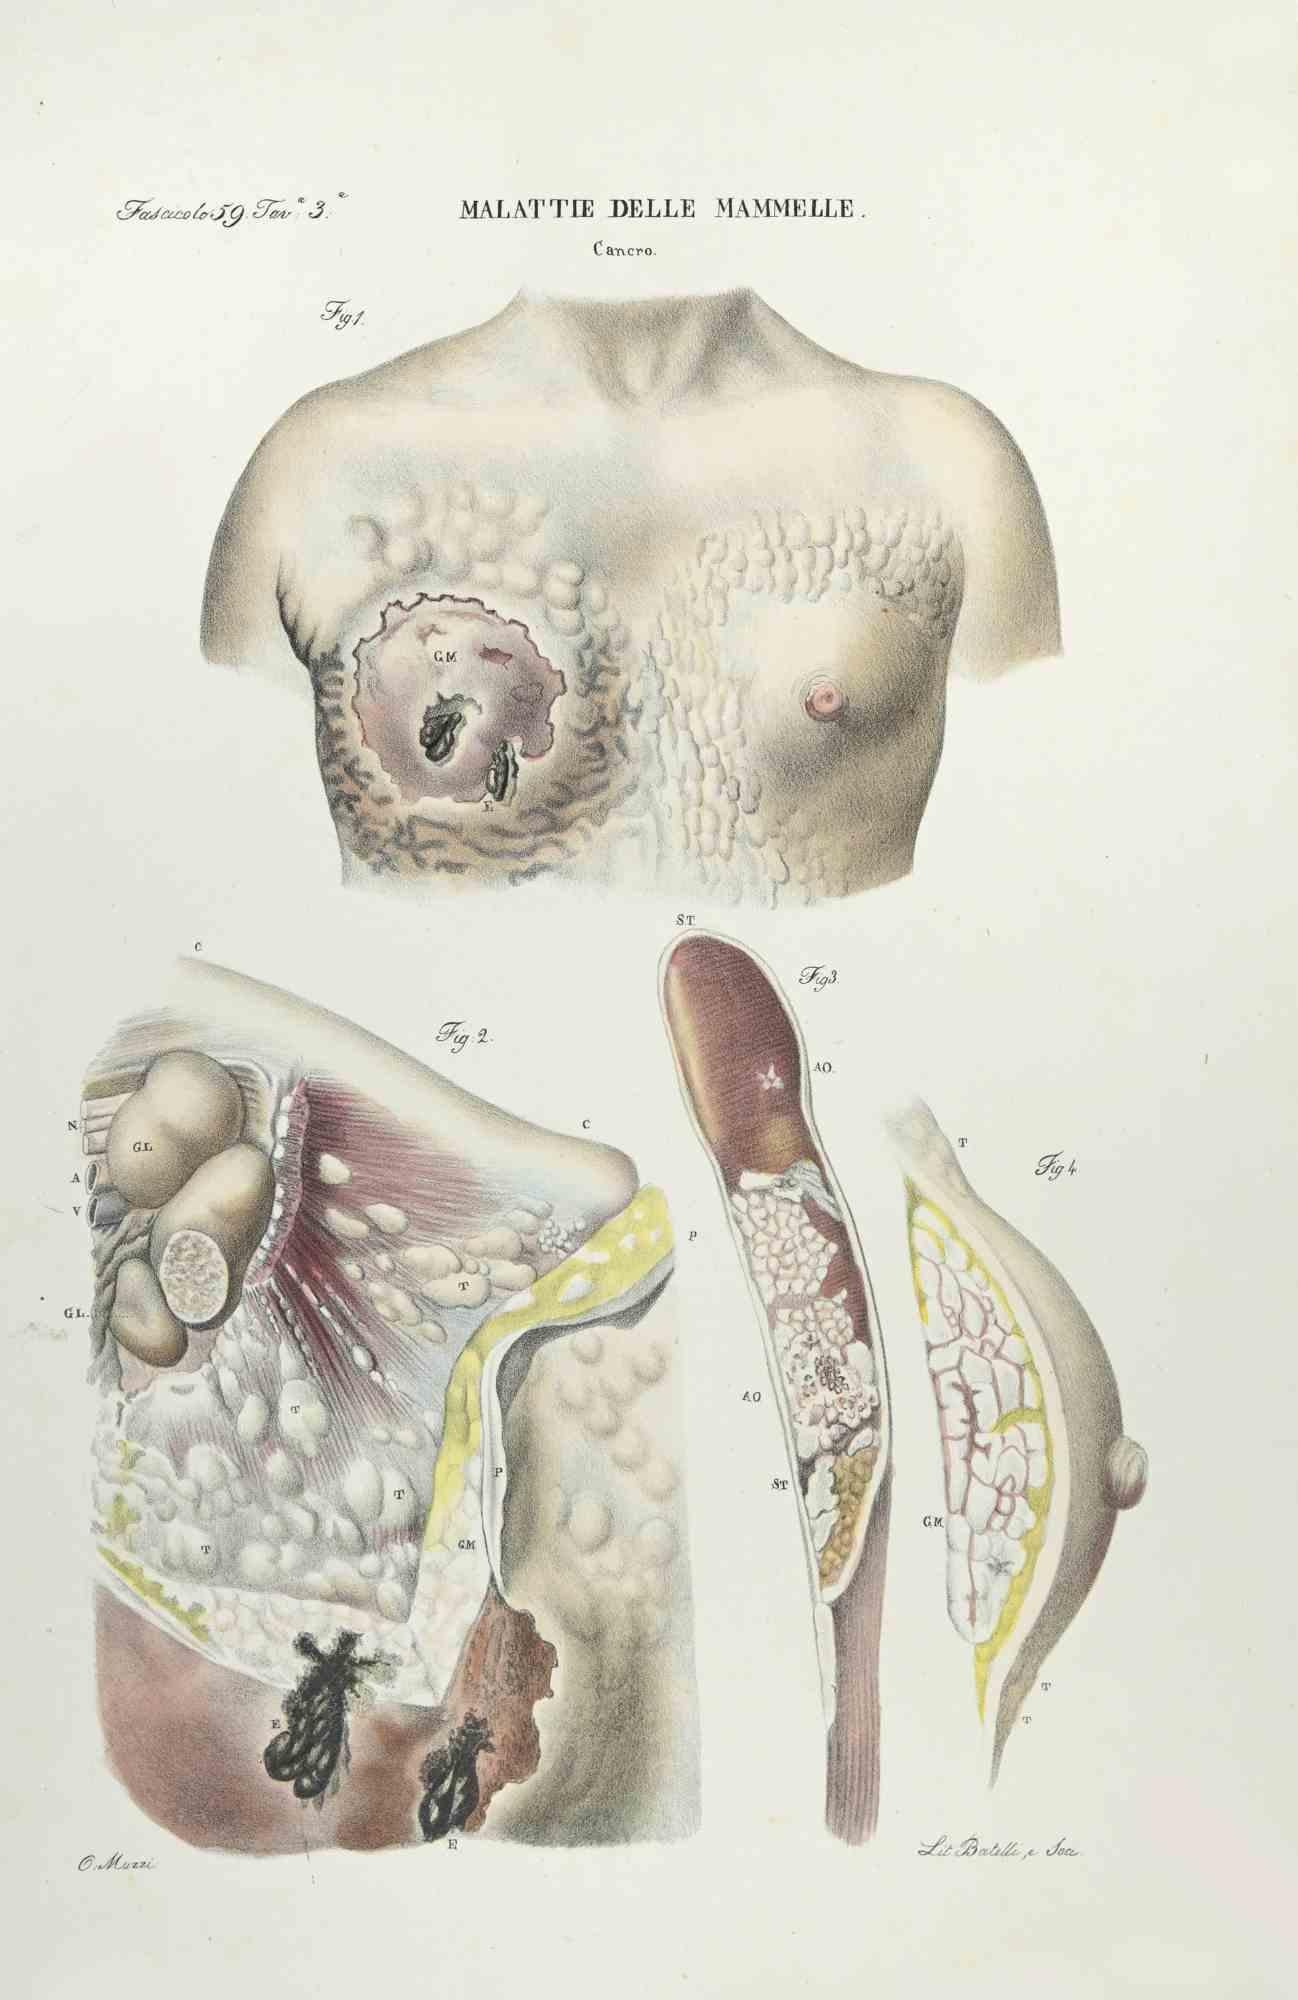 Breast Diseases is a lithograph hand colored by Ottavio Muzzi for the edition of Antoine Chazal,Human Anatomy, Printers Batelli and Ridolfi, realized in 1843.

Signed on plate on the lower left margin.

The artwork belongs to the "Atlante Generale